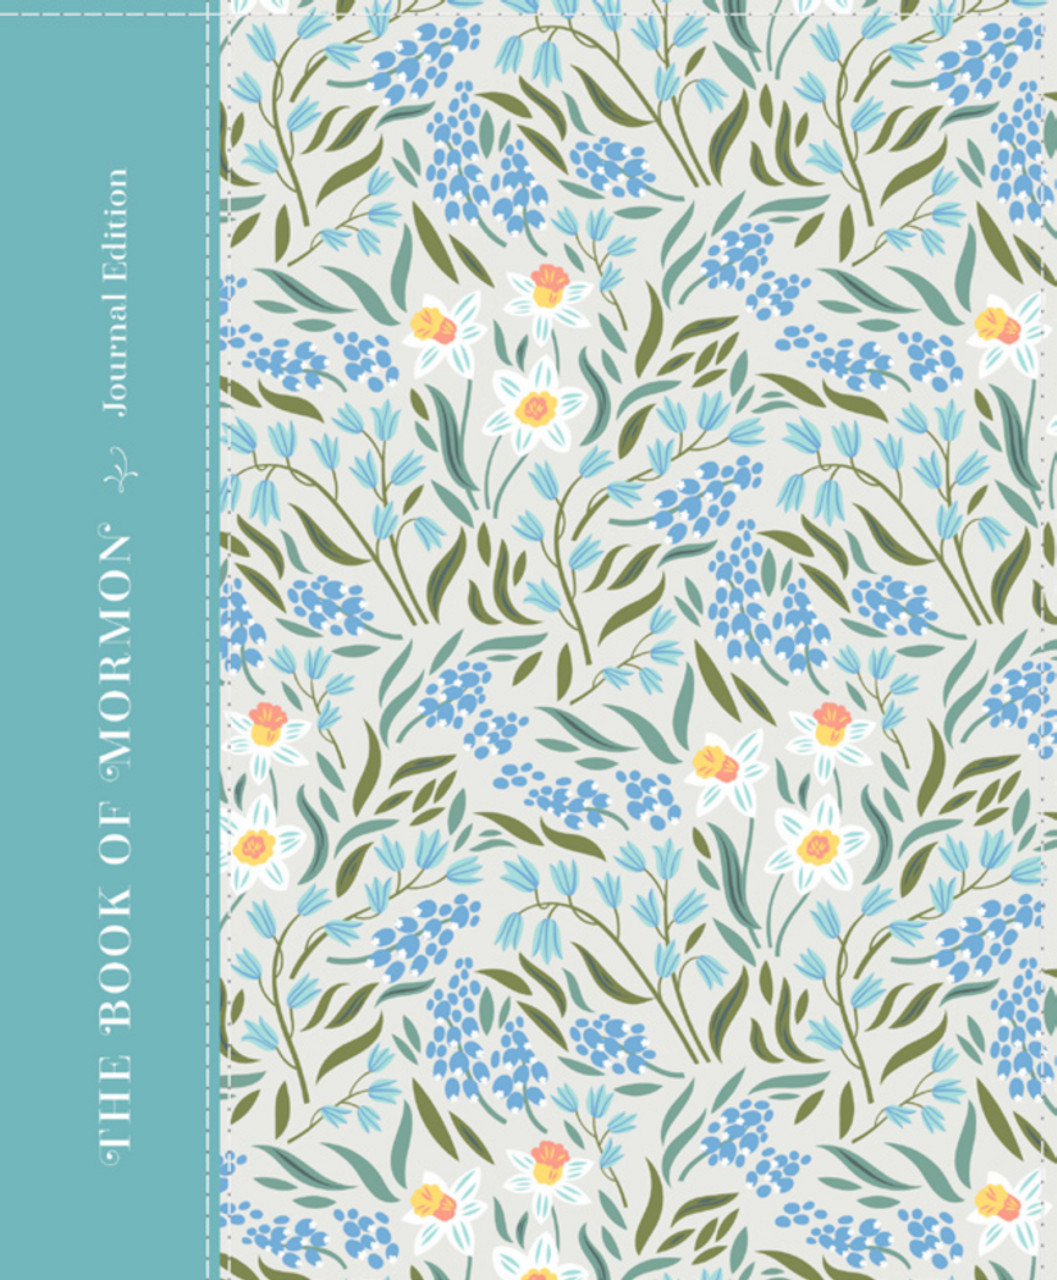 The Book of Mormon Journal Edition Turquoise Floral (Hardcover)*